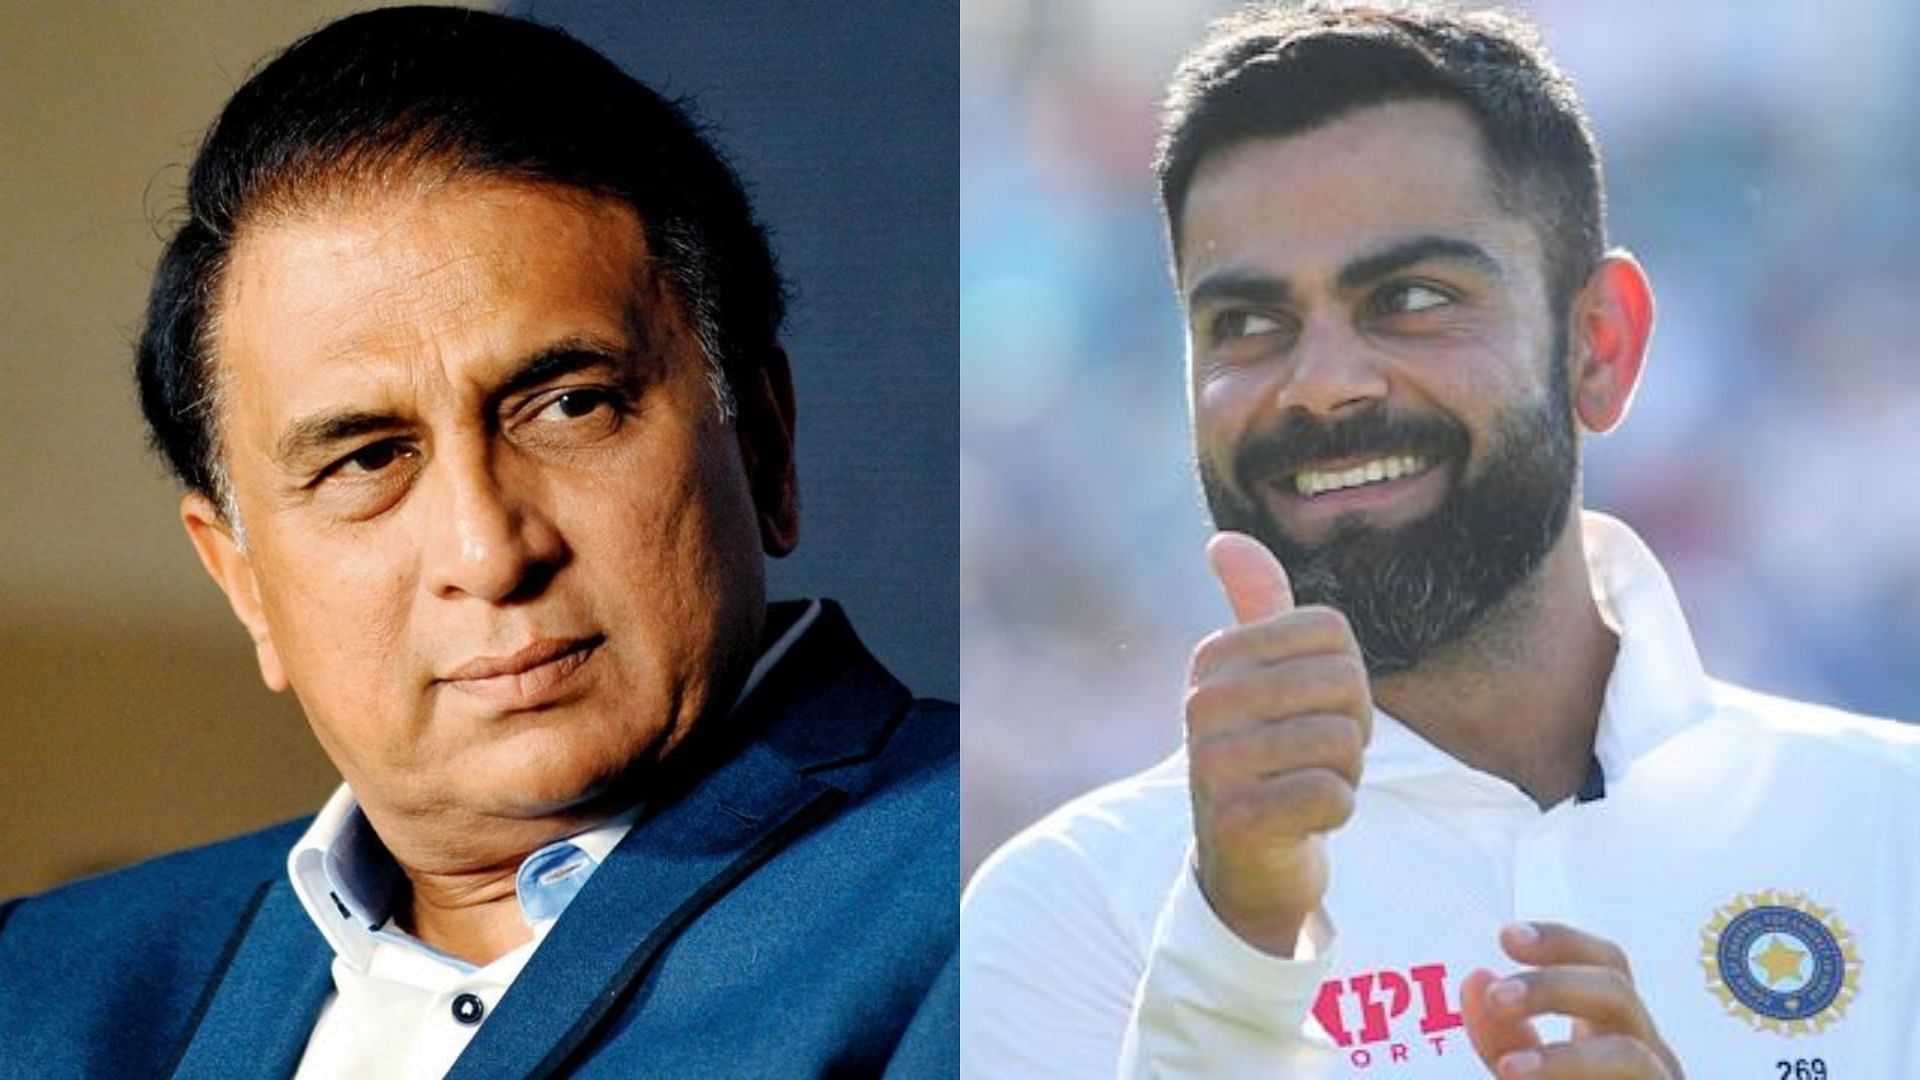 Sunil Gavaskar hopes Virat Kohli will score a century in his 100th Test match which is to be played against Sri Lanka in Mohali